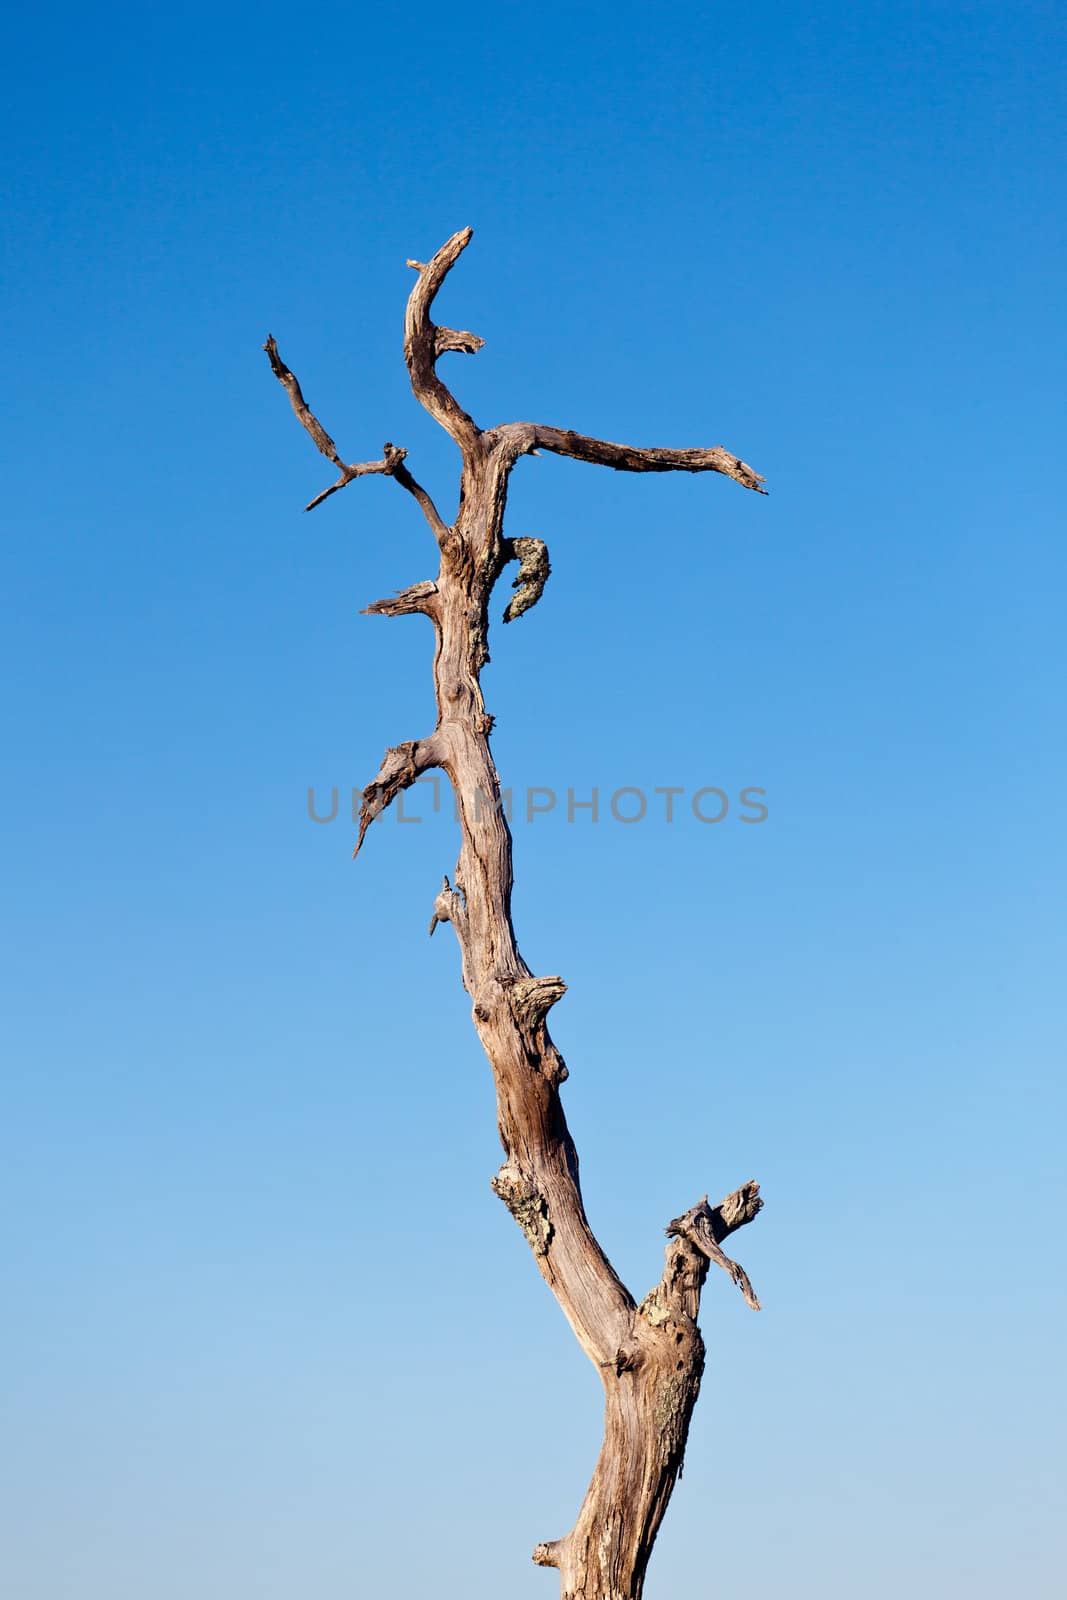 Trunk of old dead tree against a bright blue sky